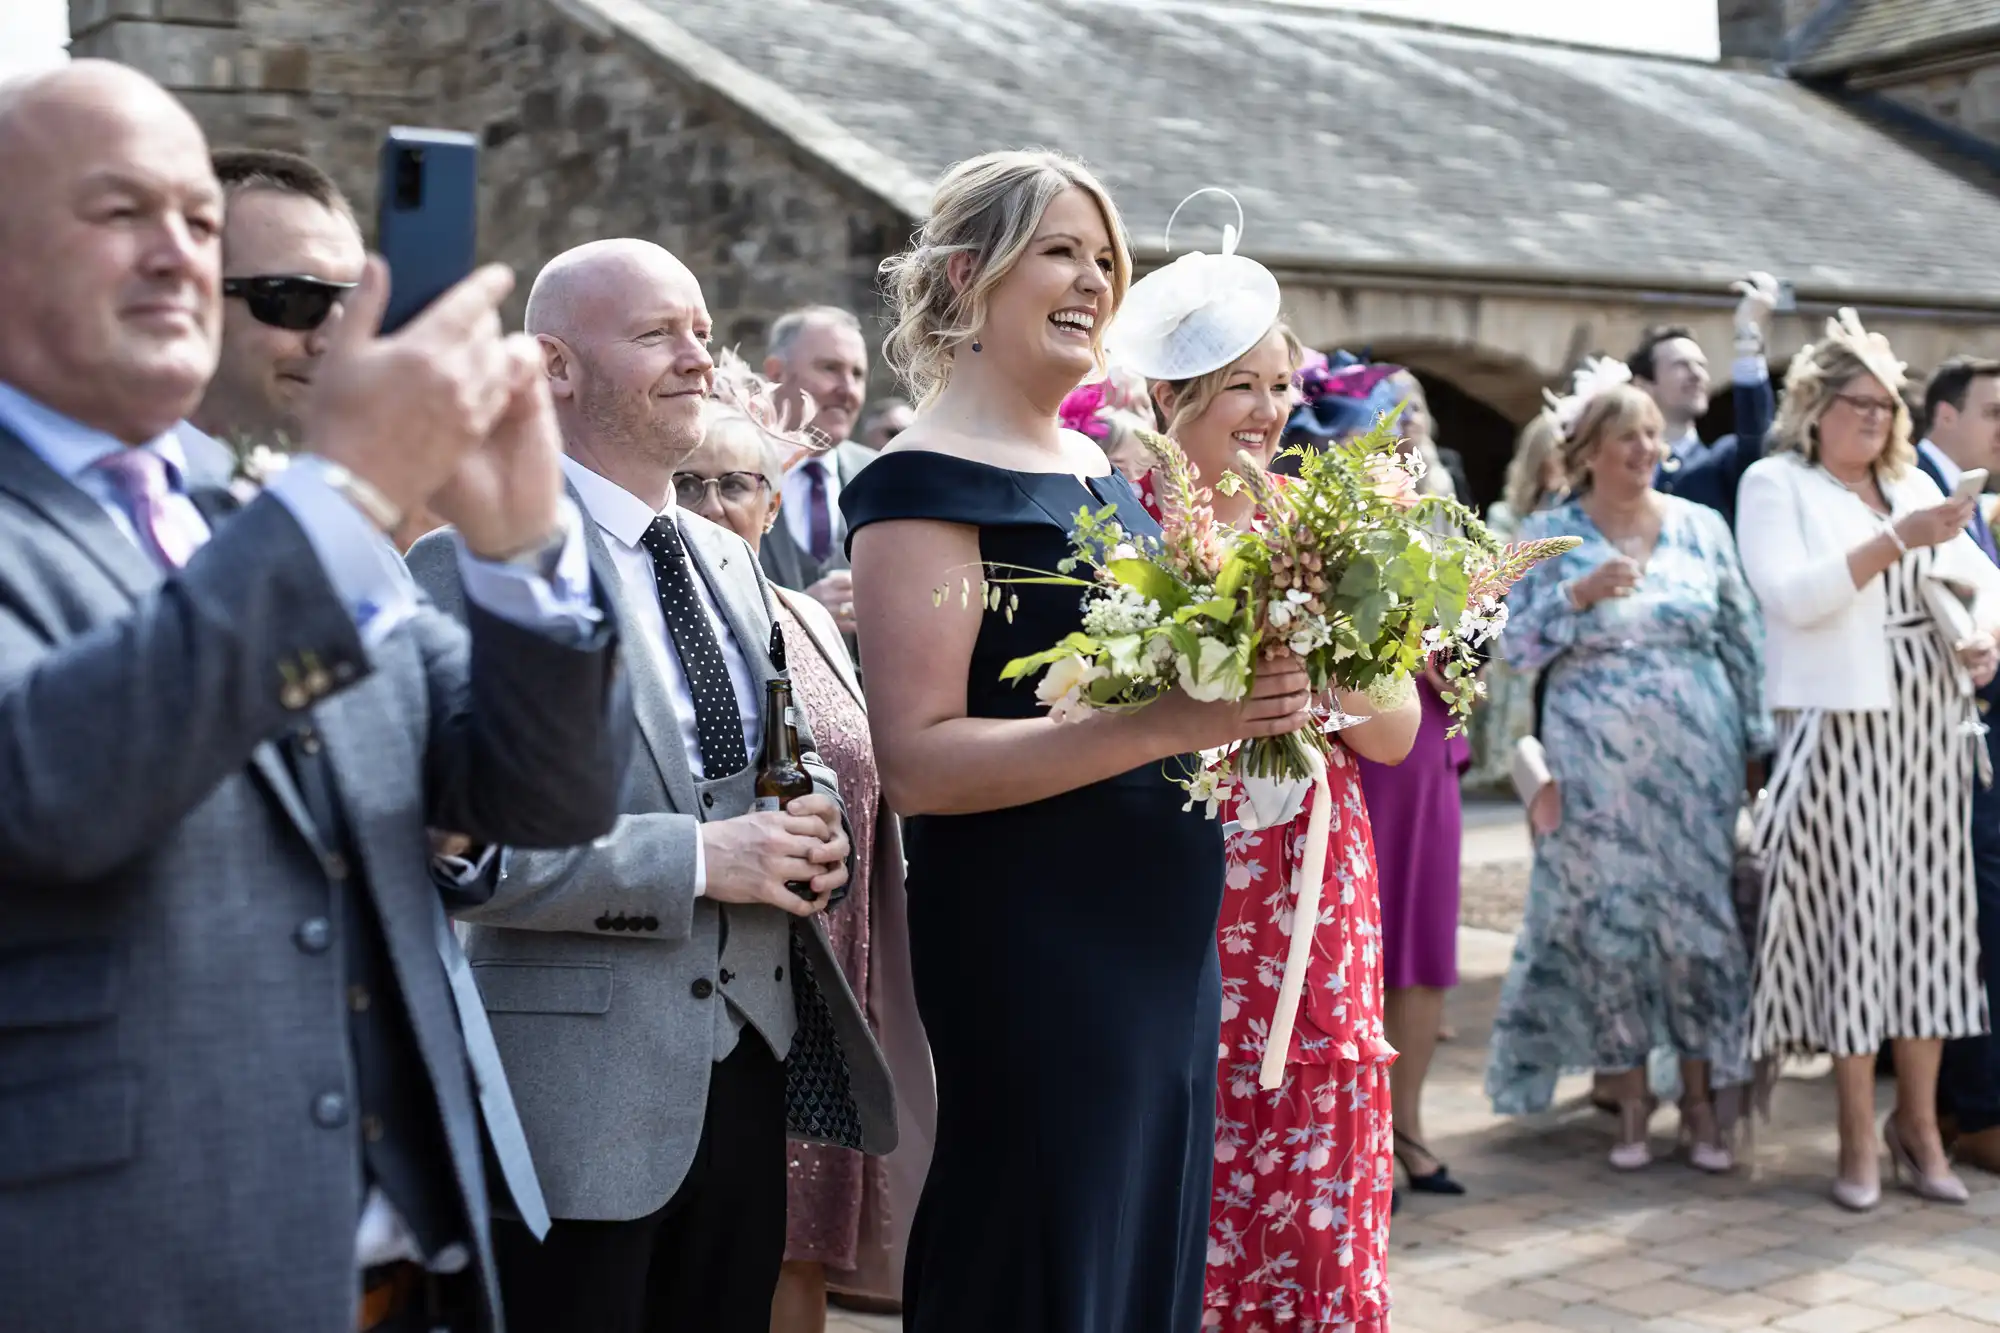 Wedding guests smiling and clapping as they watch a ceremony outside a stone building, some holding phones to capture the event.